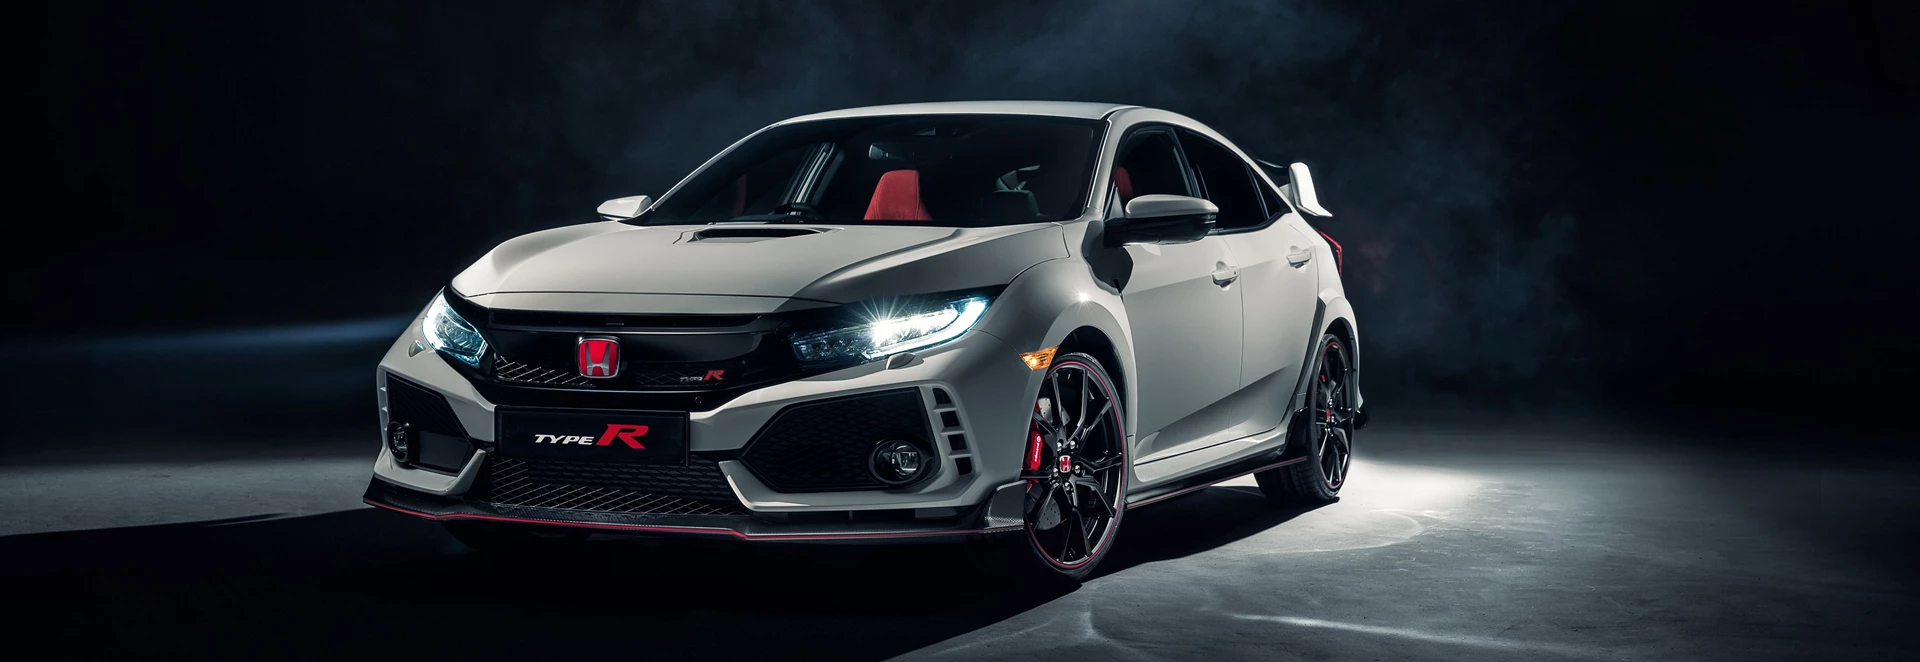 Why the 2018 Honda Civic Type R tops the hot hatch pile 